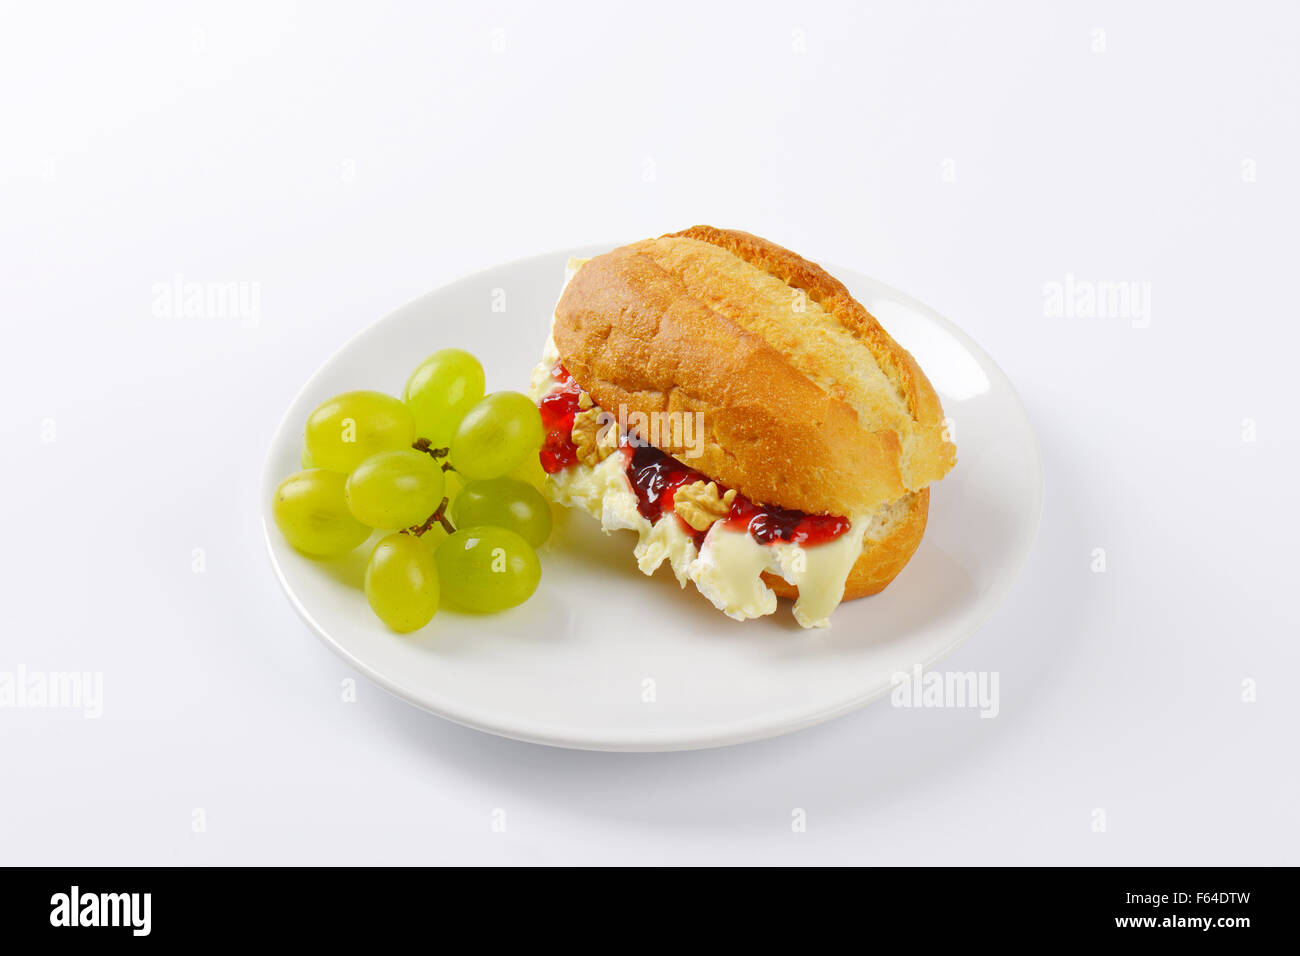 small baguette with brie cheese, walnuts, jam and grapes on white plate Stock Photo